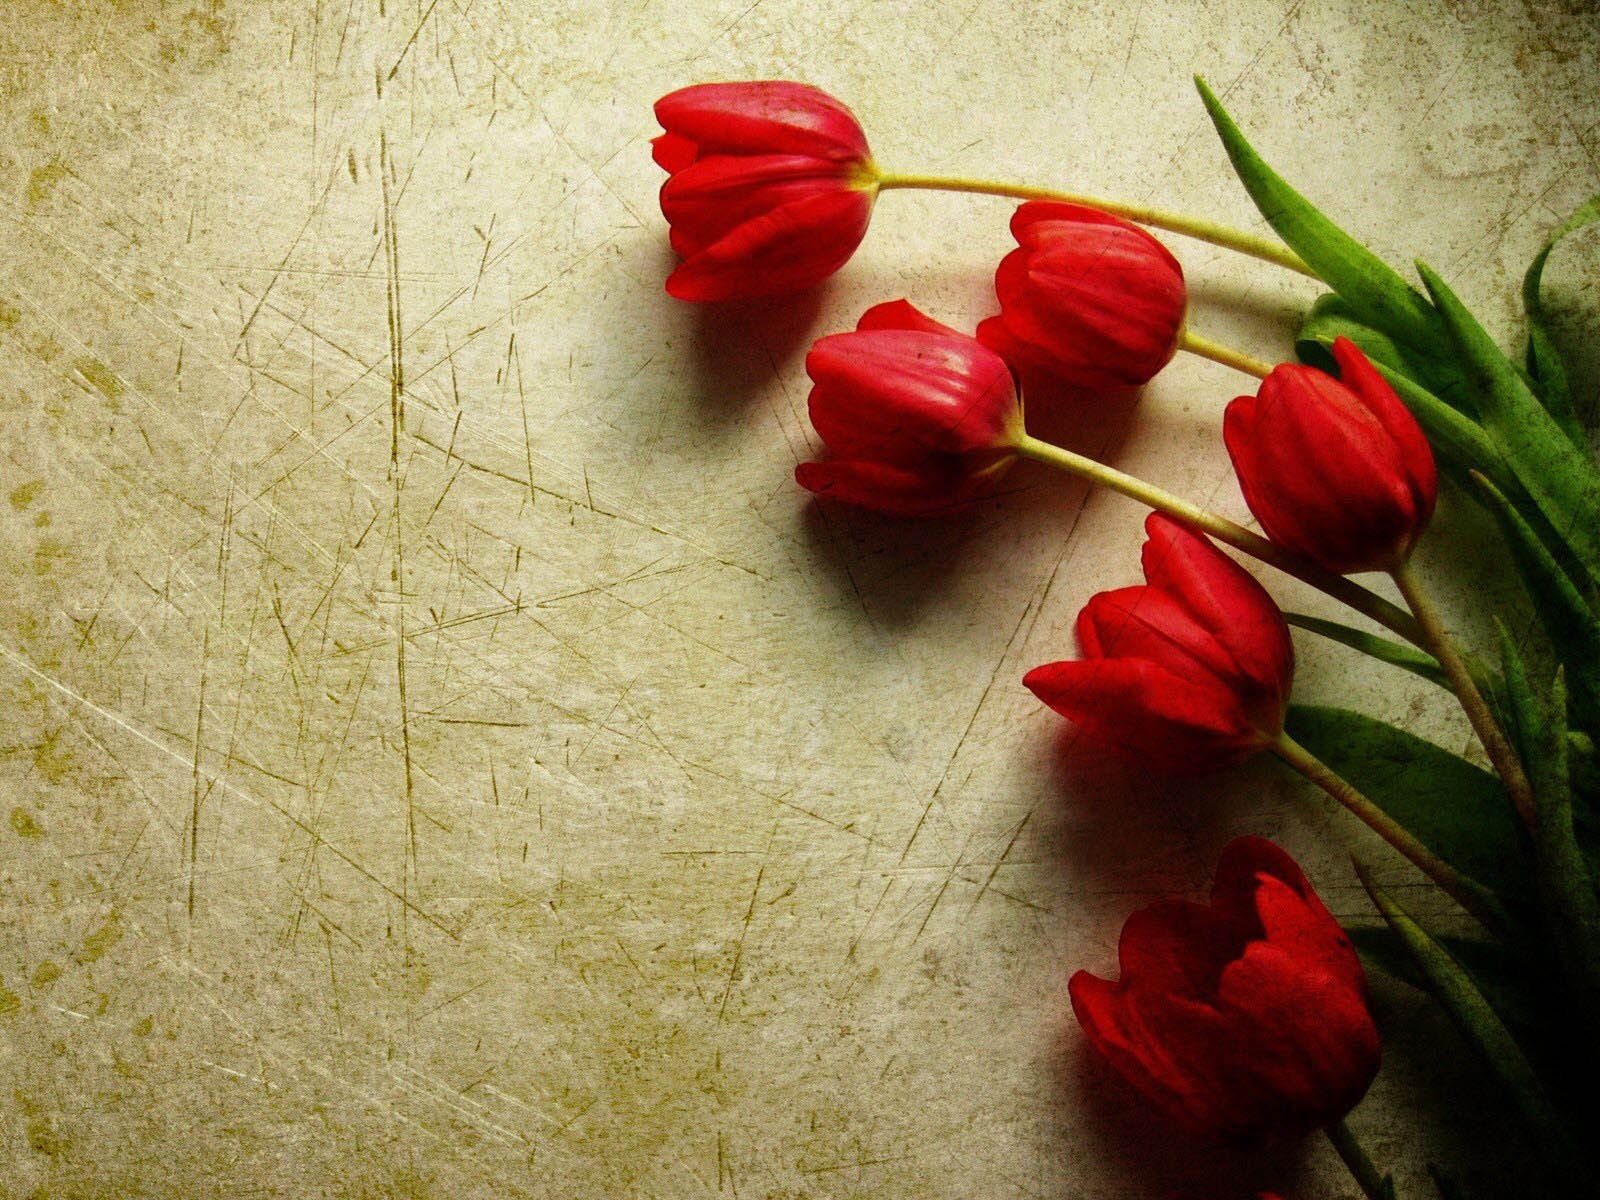 Red tulip flowers images and wallpapers Download